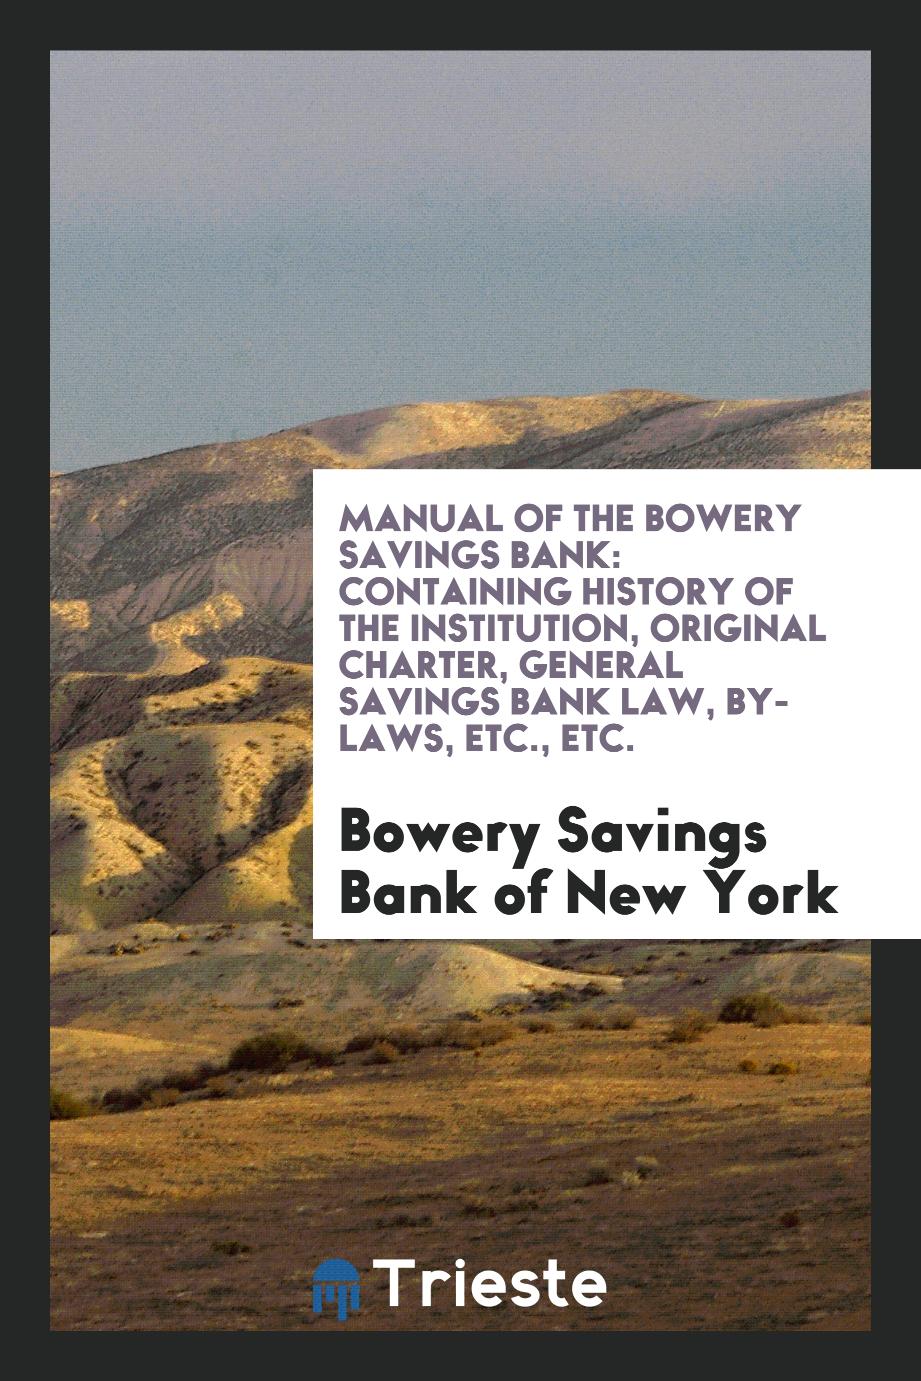 Manual of the Bowery Savings Bank: Containing History of the Institution, Original Charter, General Savings Bank Law, by-Laws, Etc., Etc.